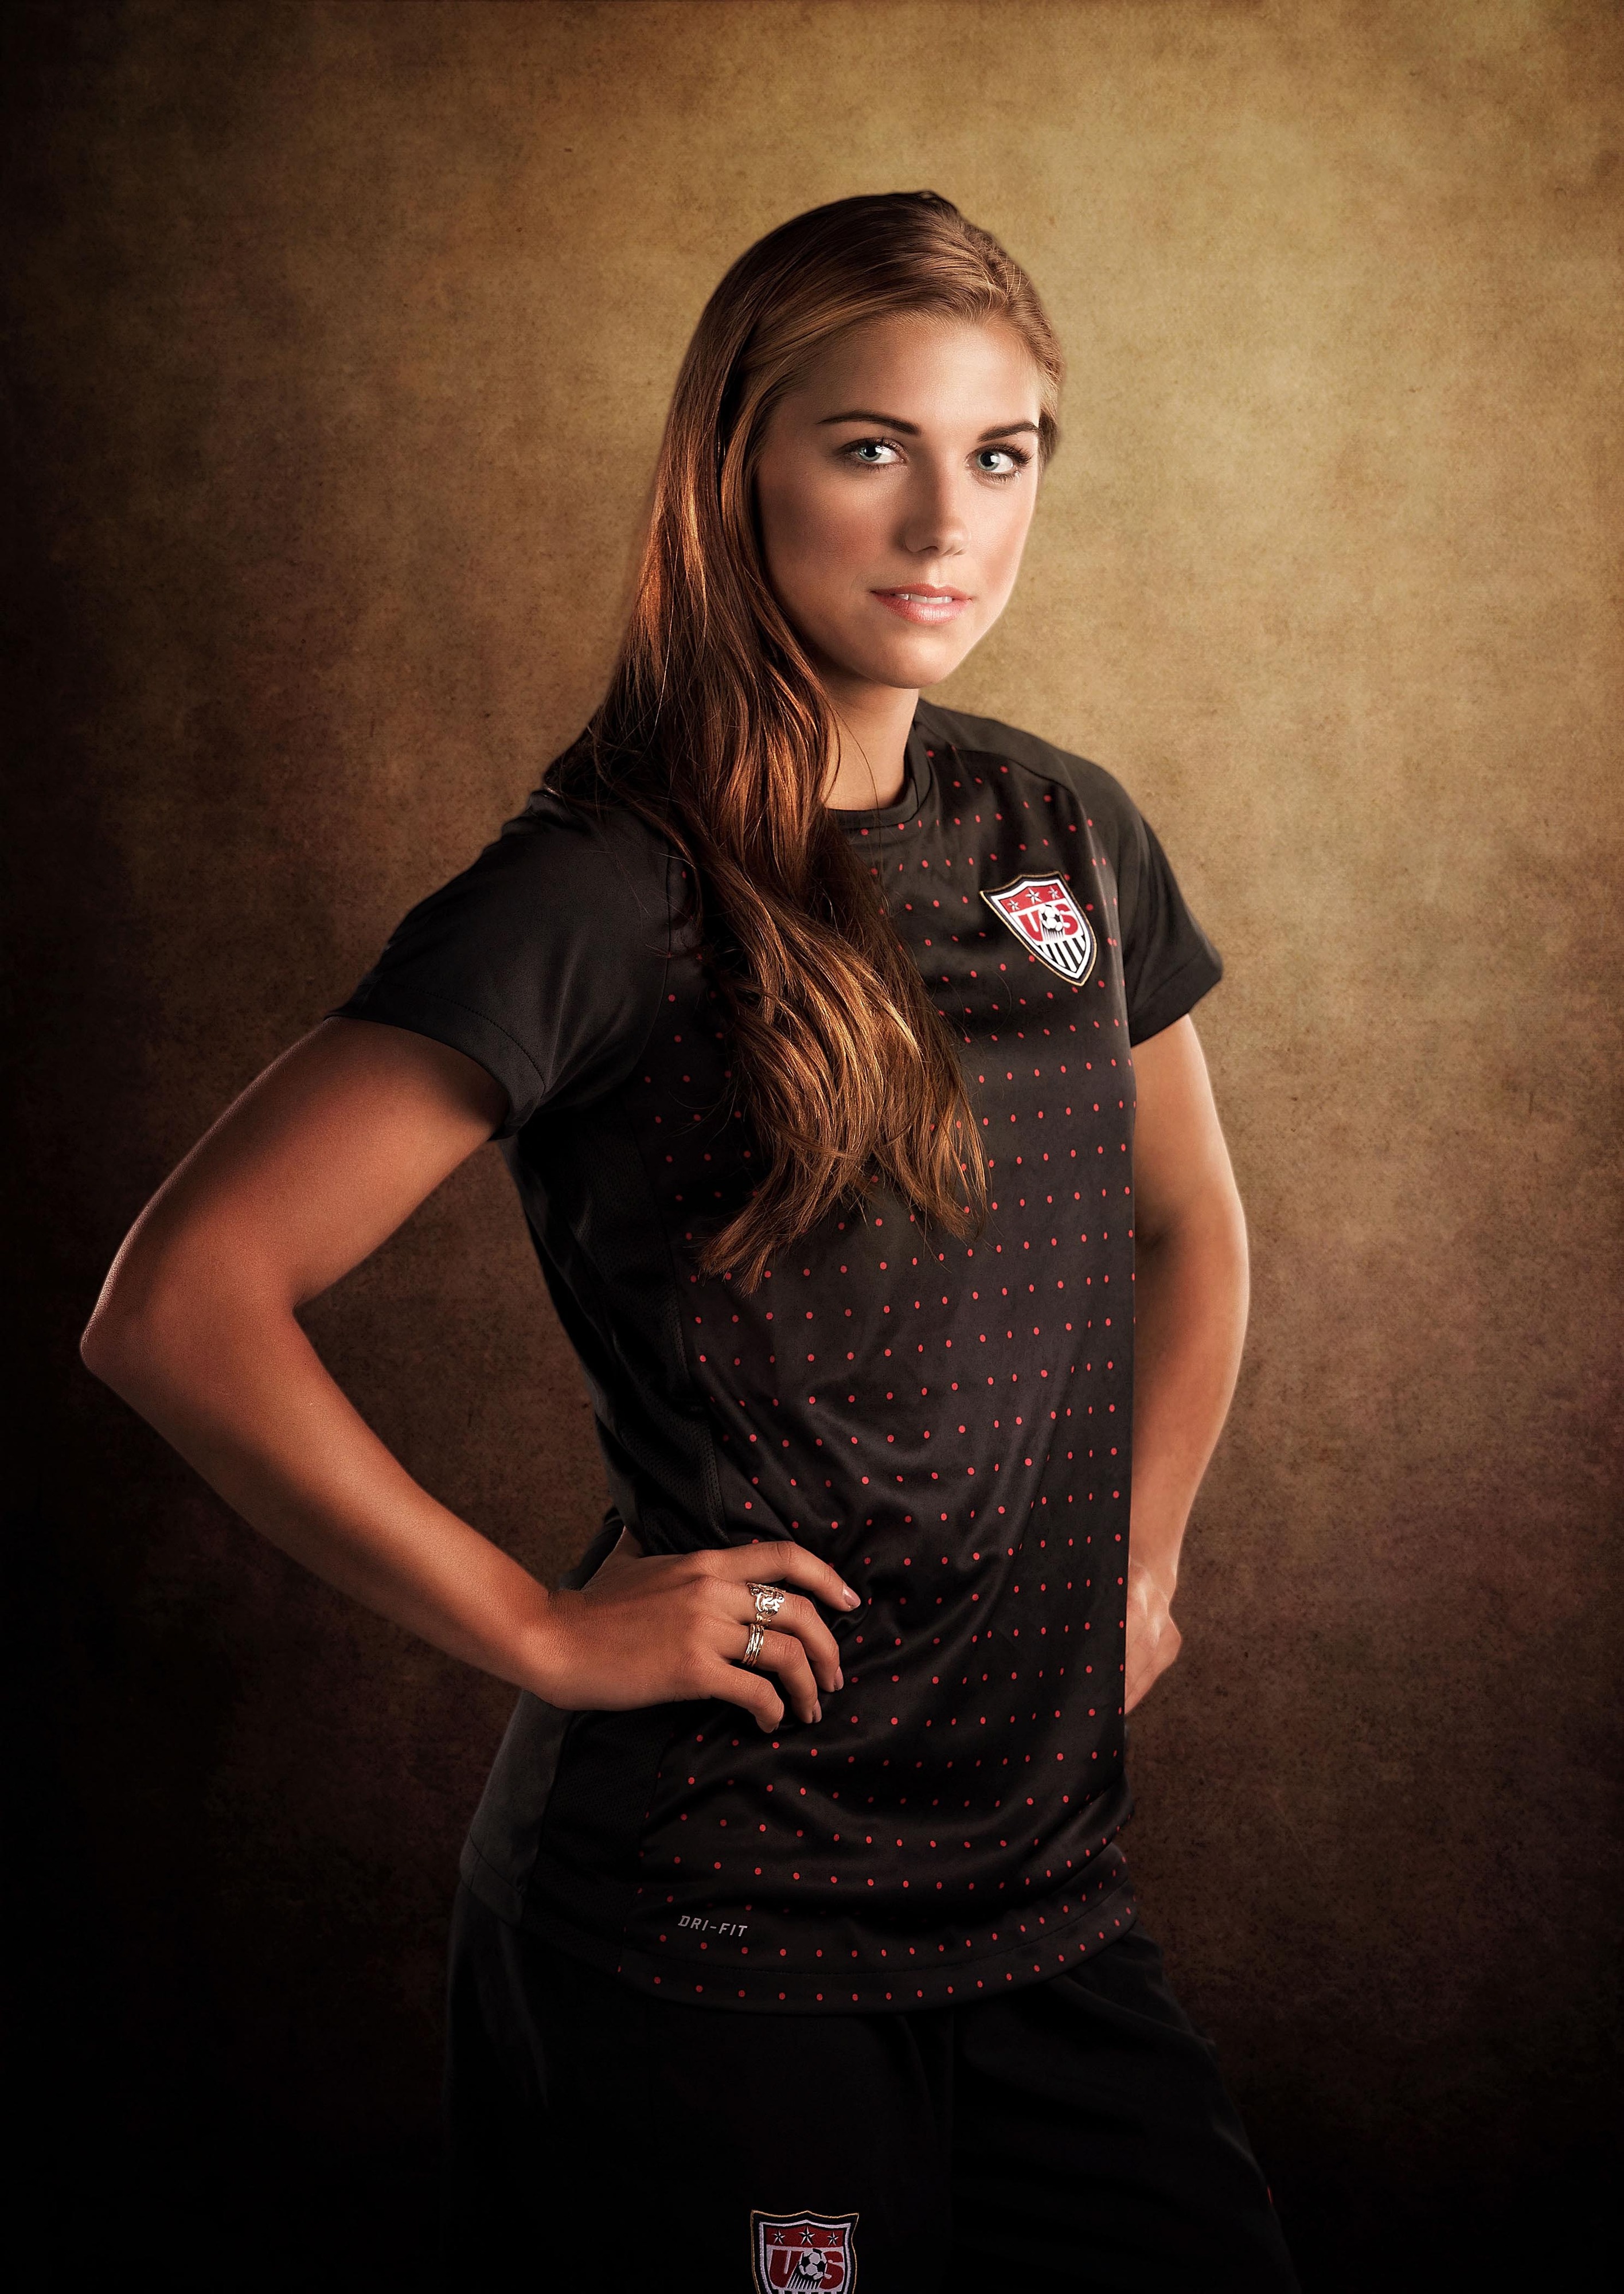 July 24, 2012; Dallas, Tx, USA; **PHOTO ILLUSTRATION** Special photo manipulation was used to create this image.  Women's soccer player Alex Morgan will compete as a member of the 2012 U.S. Olympic Team.   Mandatory Credit: Kevin Jairaj-US PRESSWIRE